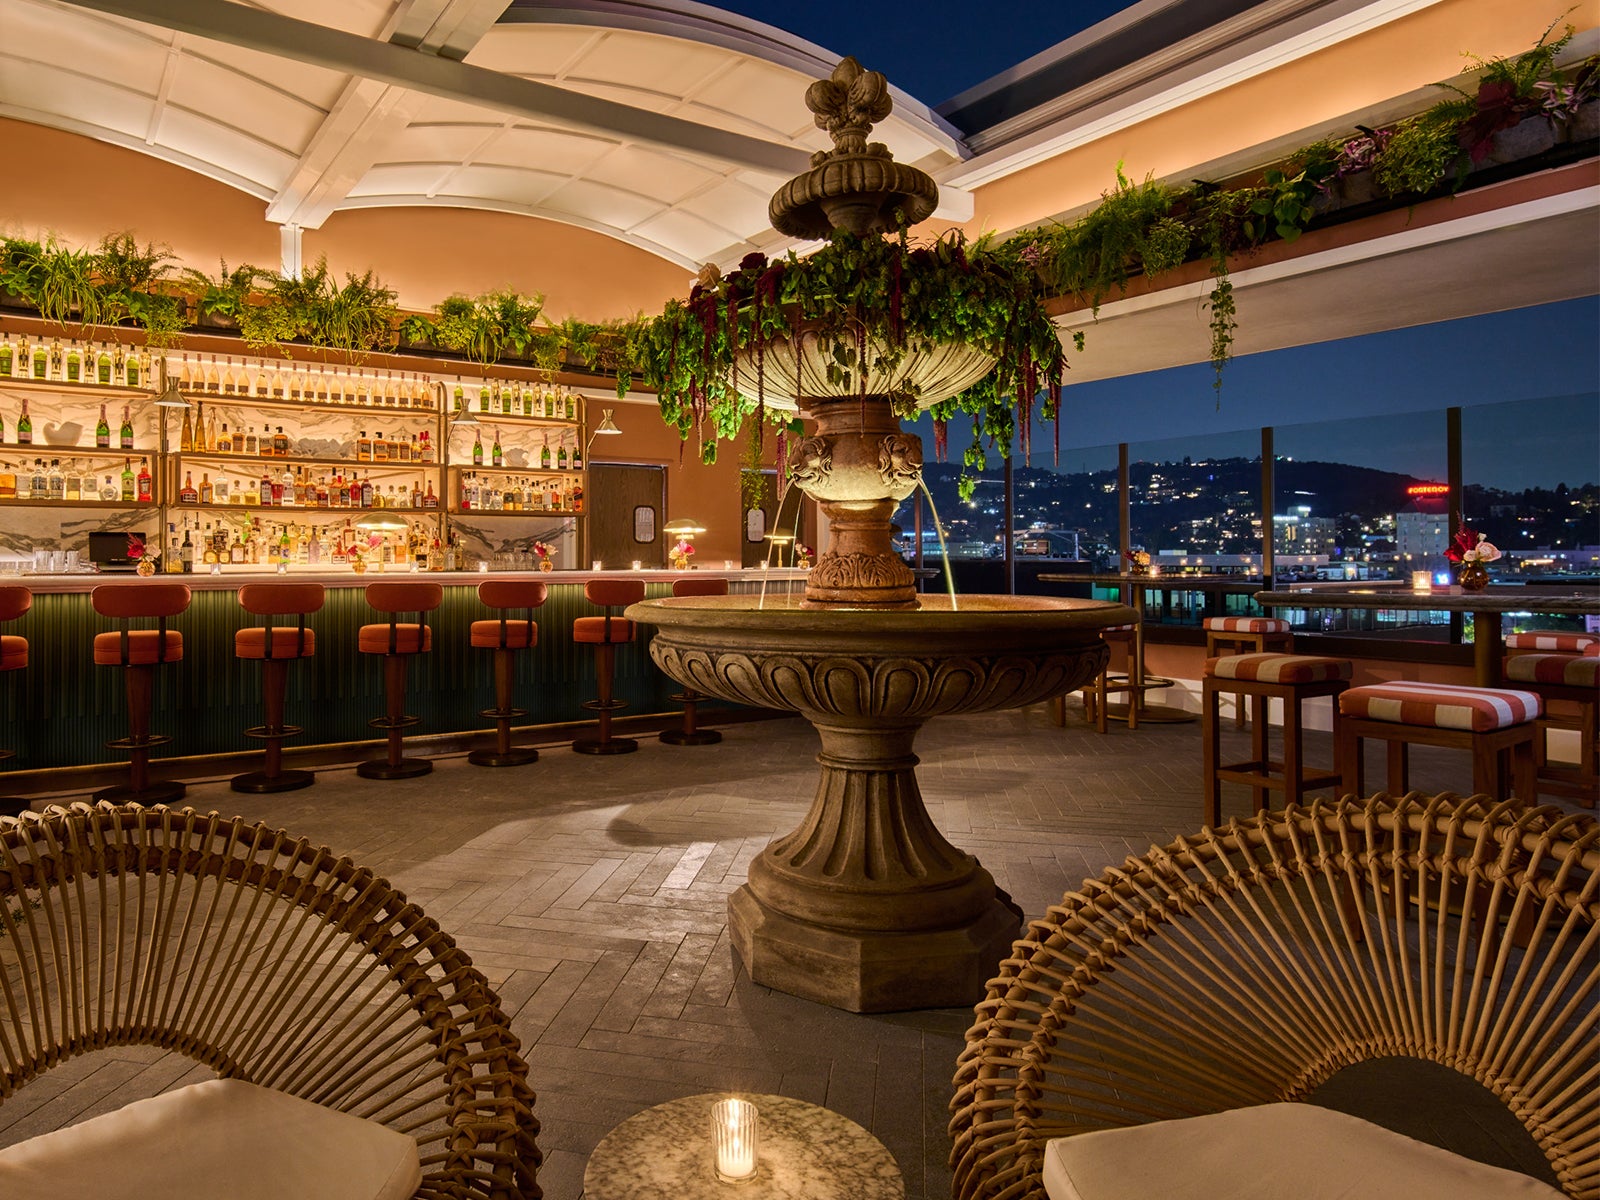 Belvedere Organics terrace has opened at The Social